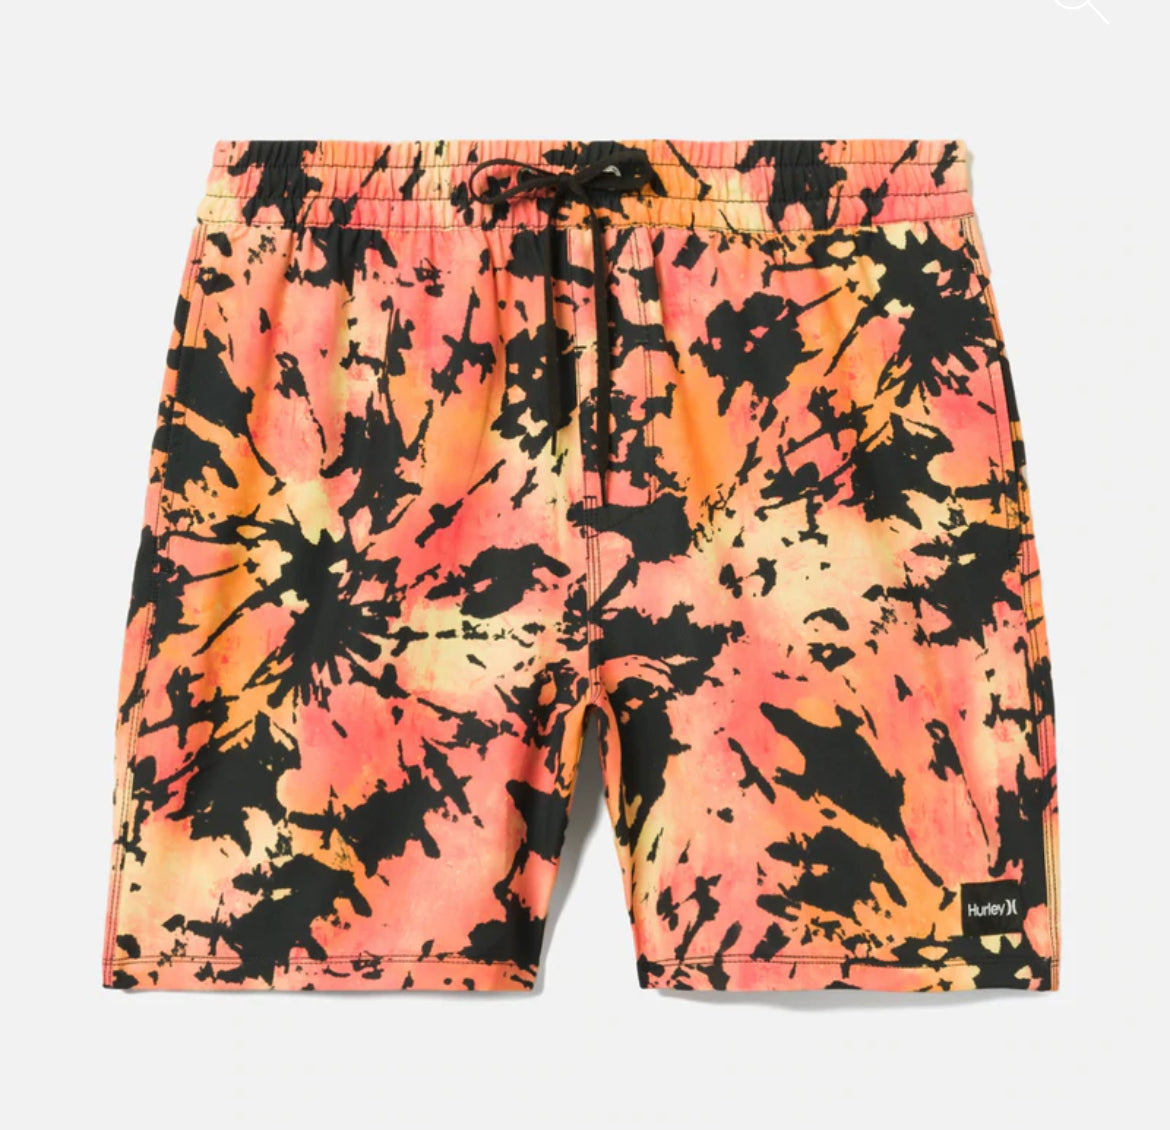 CANNONBALL VOLLEY BOARDSHORTS 17"- Ember